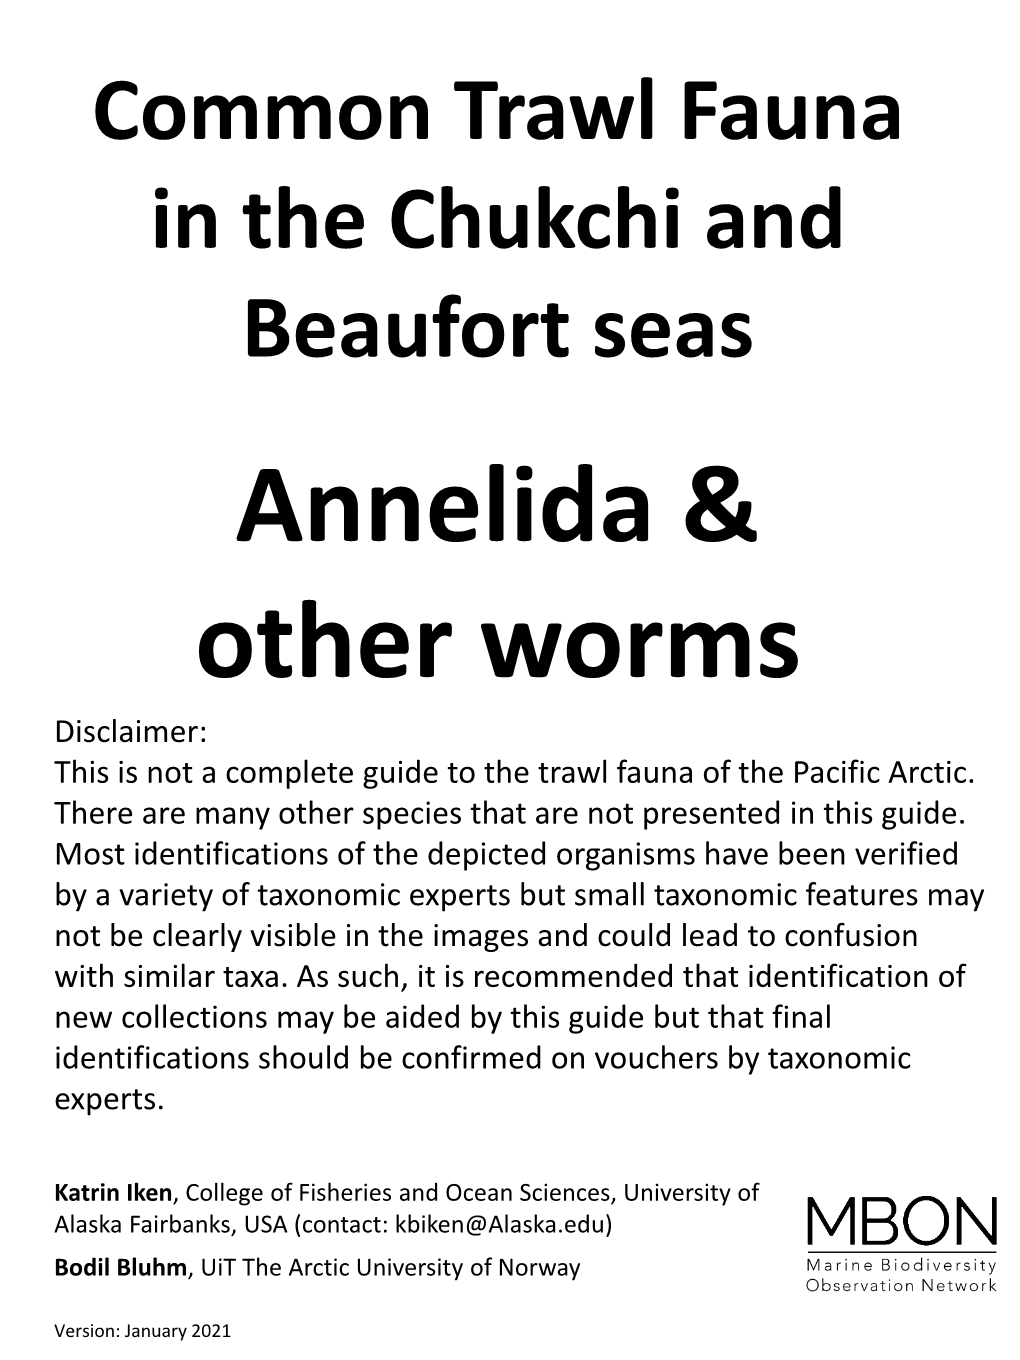 Annelida & Other Worms